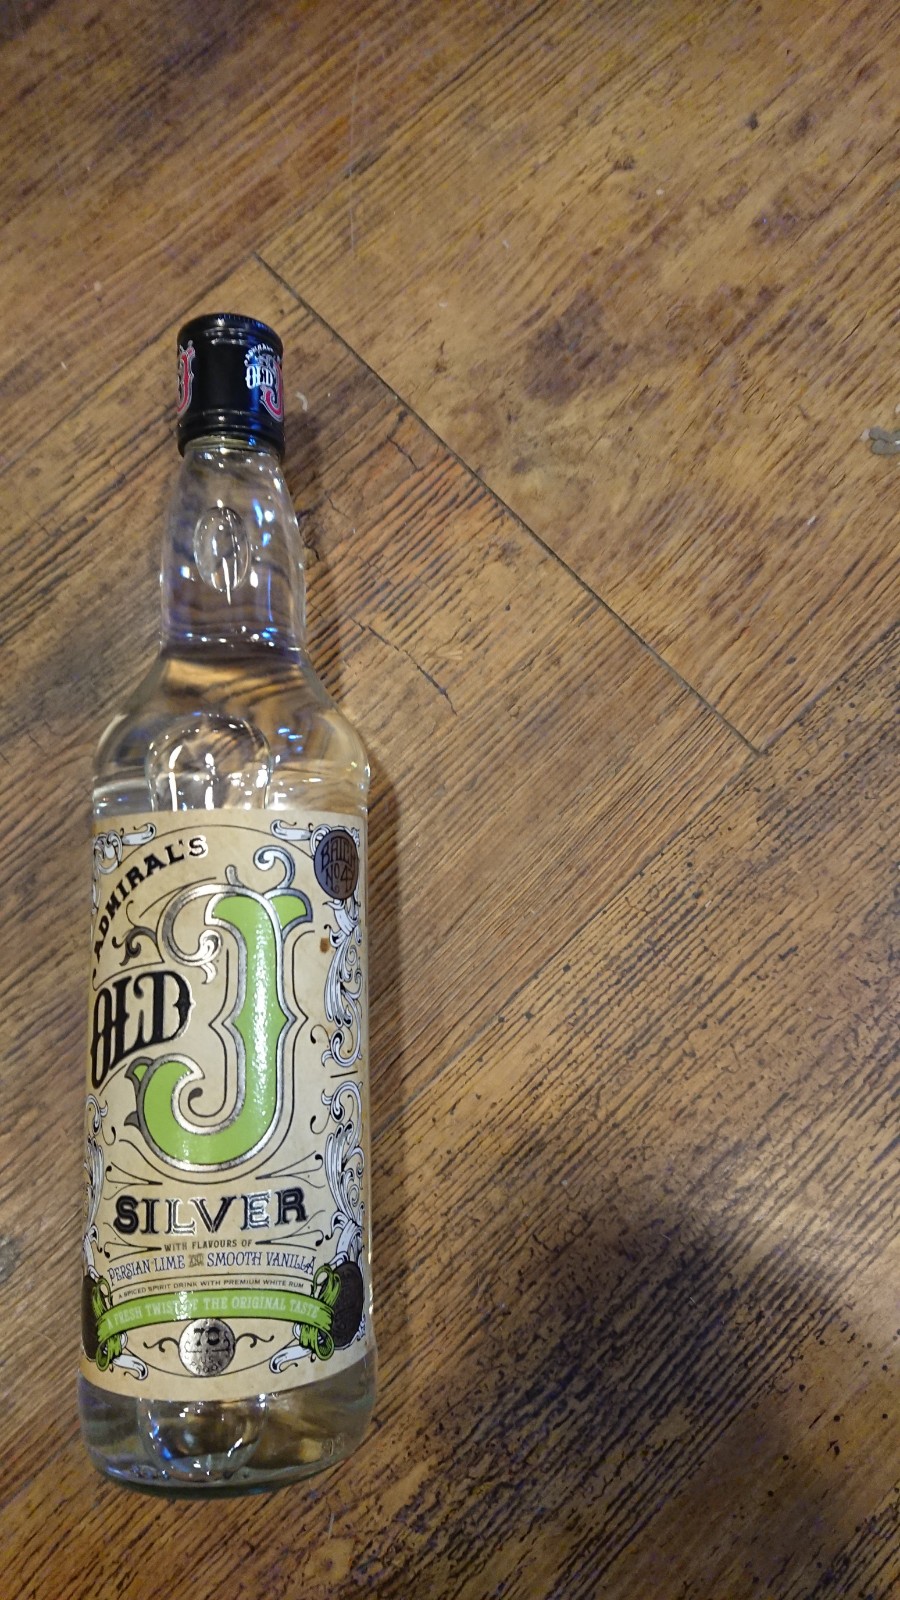 Admiral's Old J Silver RUM